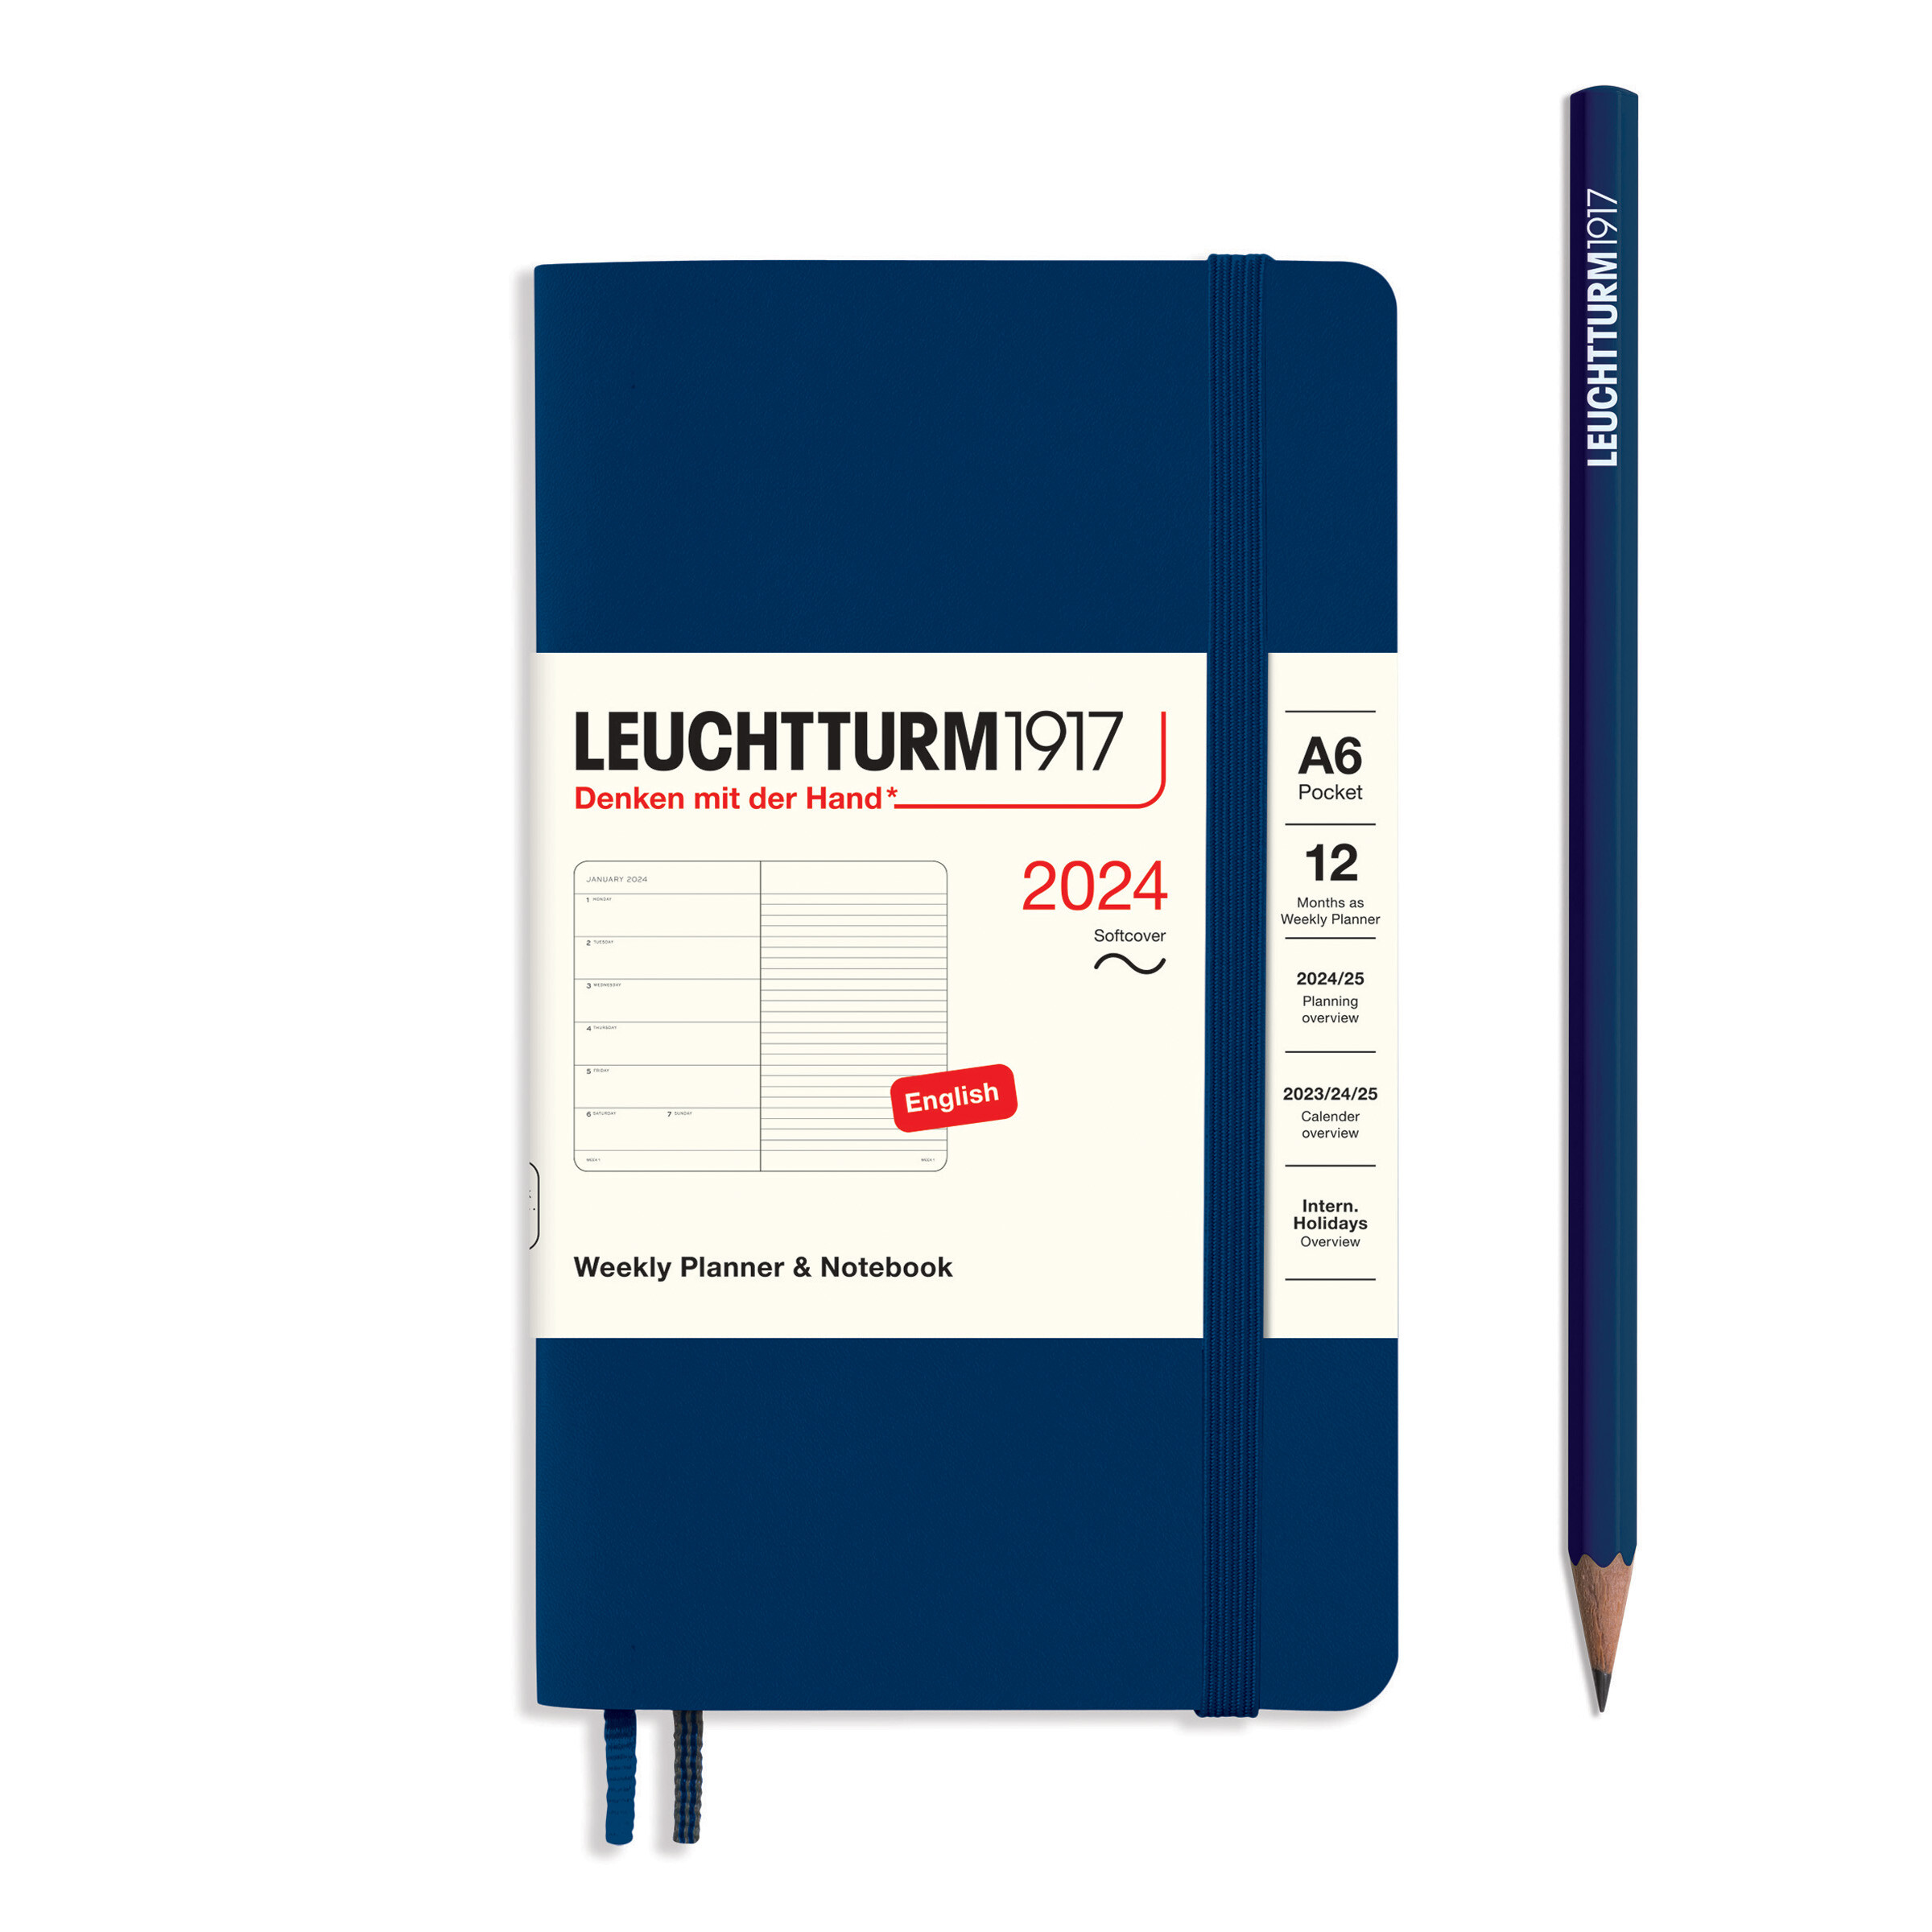 Leuchtturm1917 Weekly Planner & Notebook Soft Cover Pocket A6 2024 - Pencraft the boutique